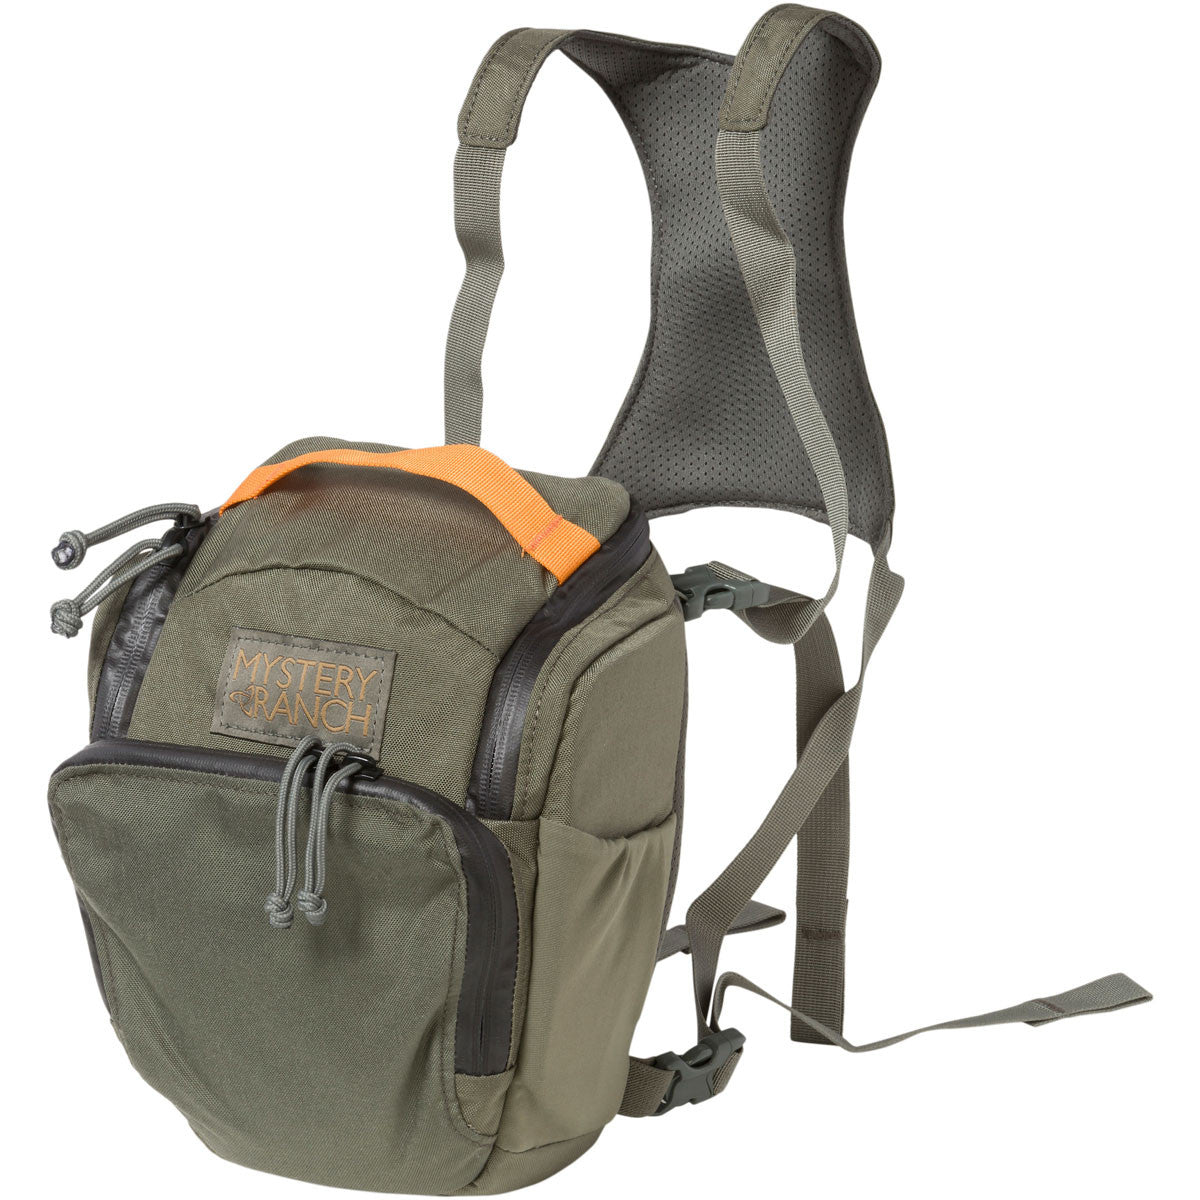 Boone Mountain Sports - DSLR CHEST RIG